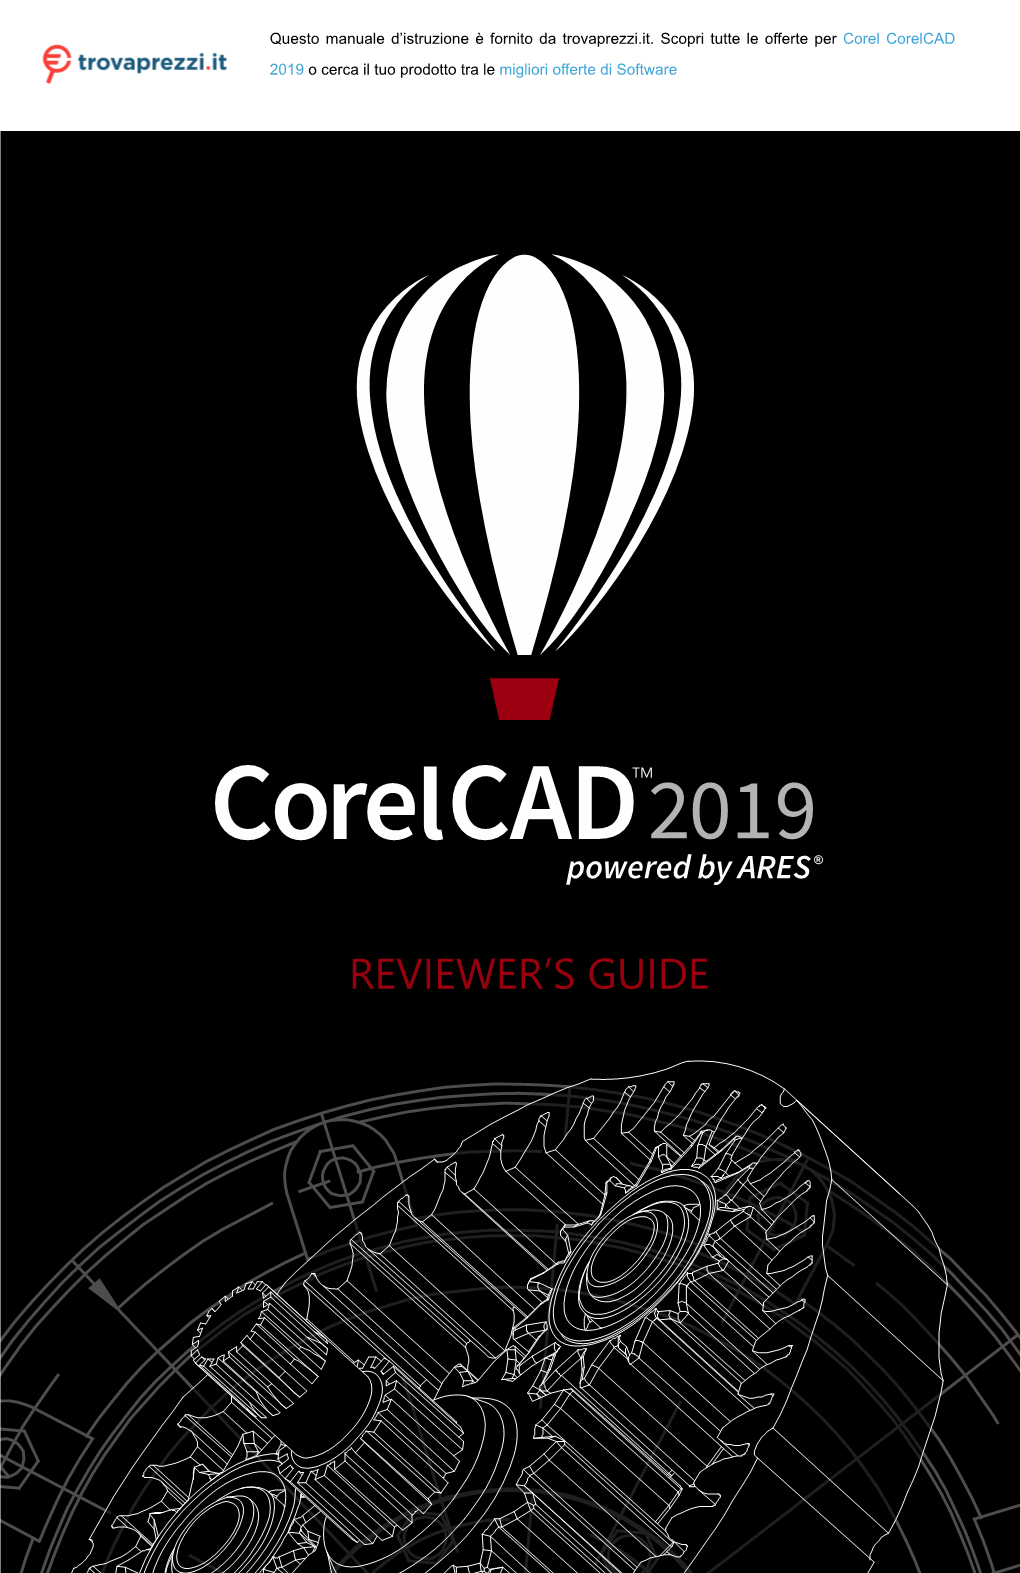 Corelcad 2019 Reviewer's Guide